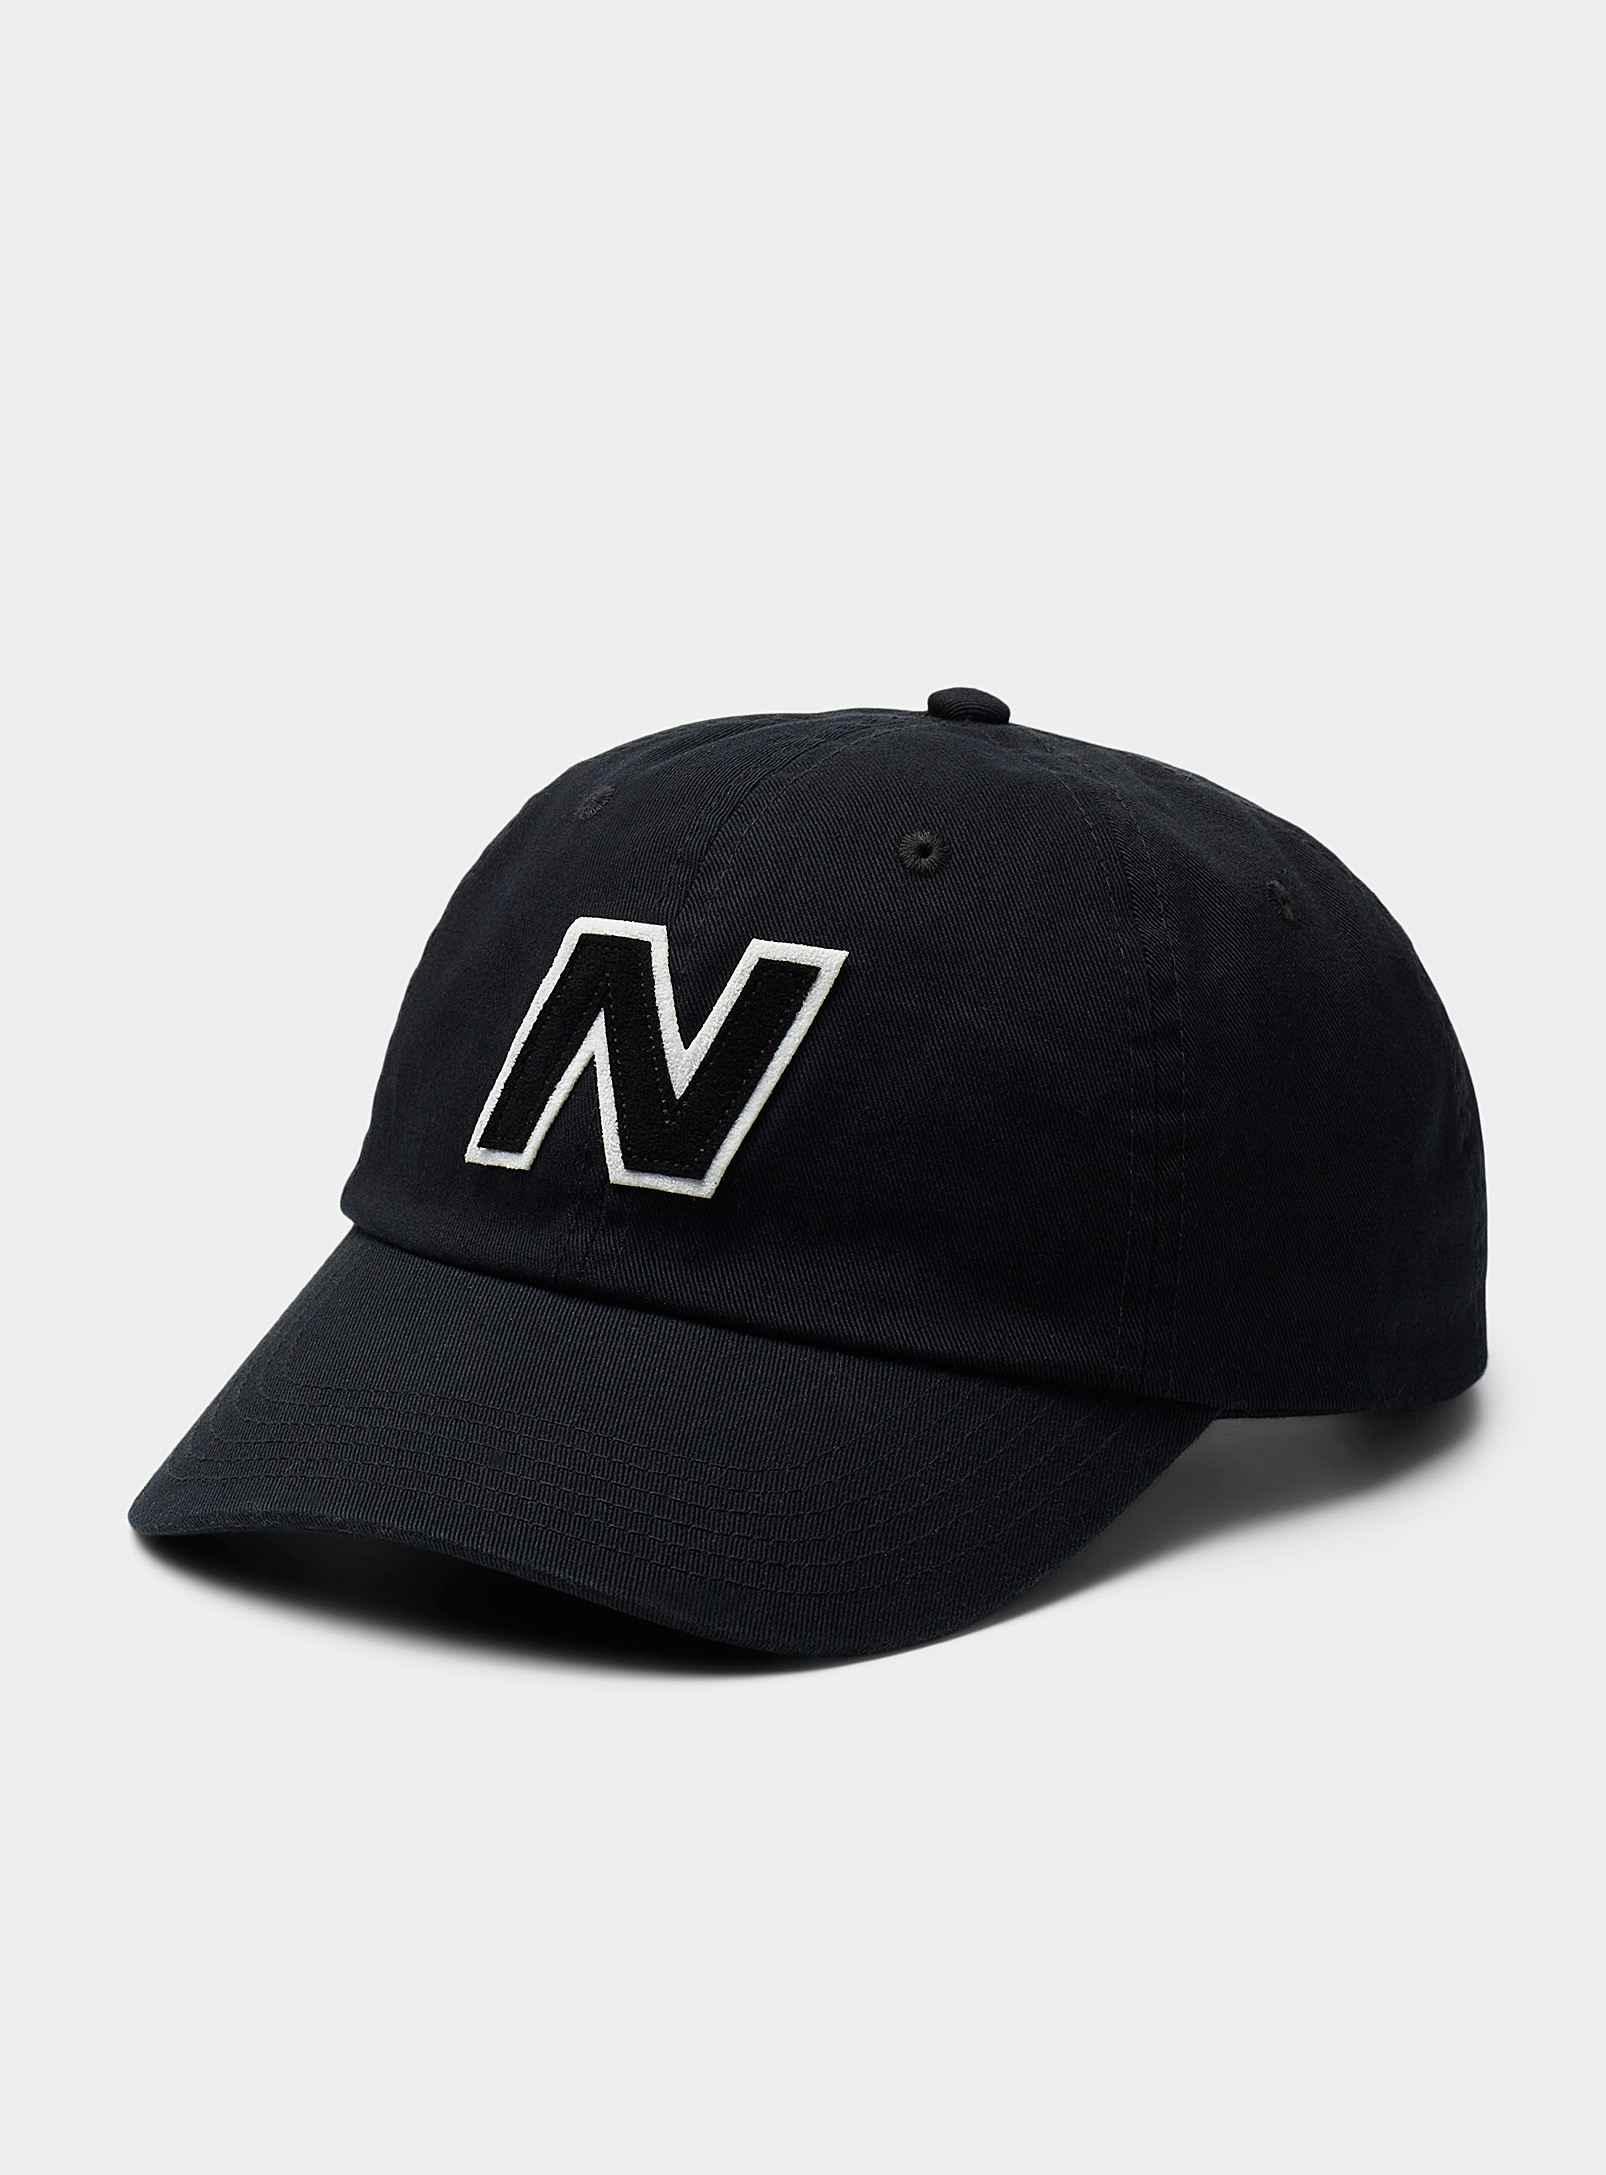 New Balance Embroidered Letter Dad Cap In Black